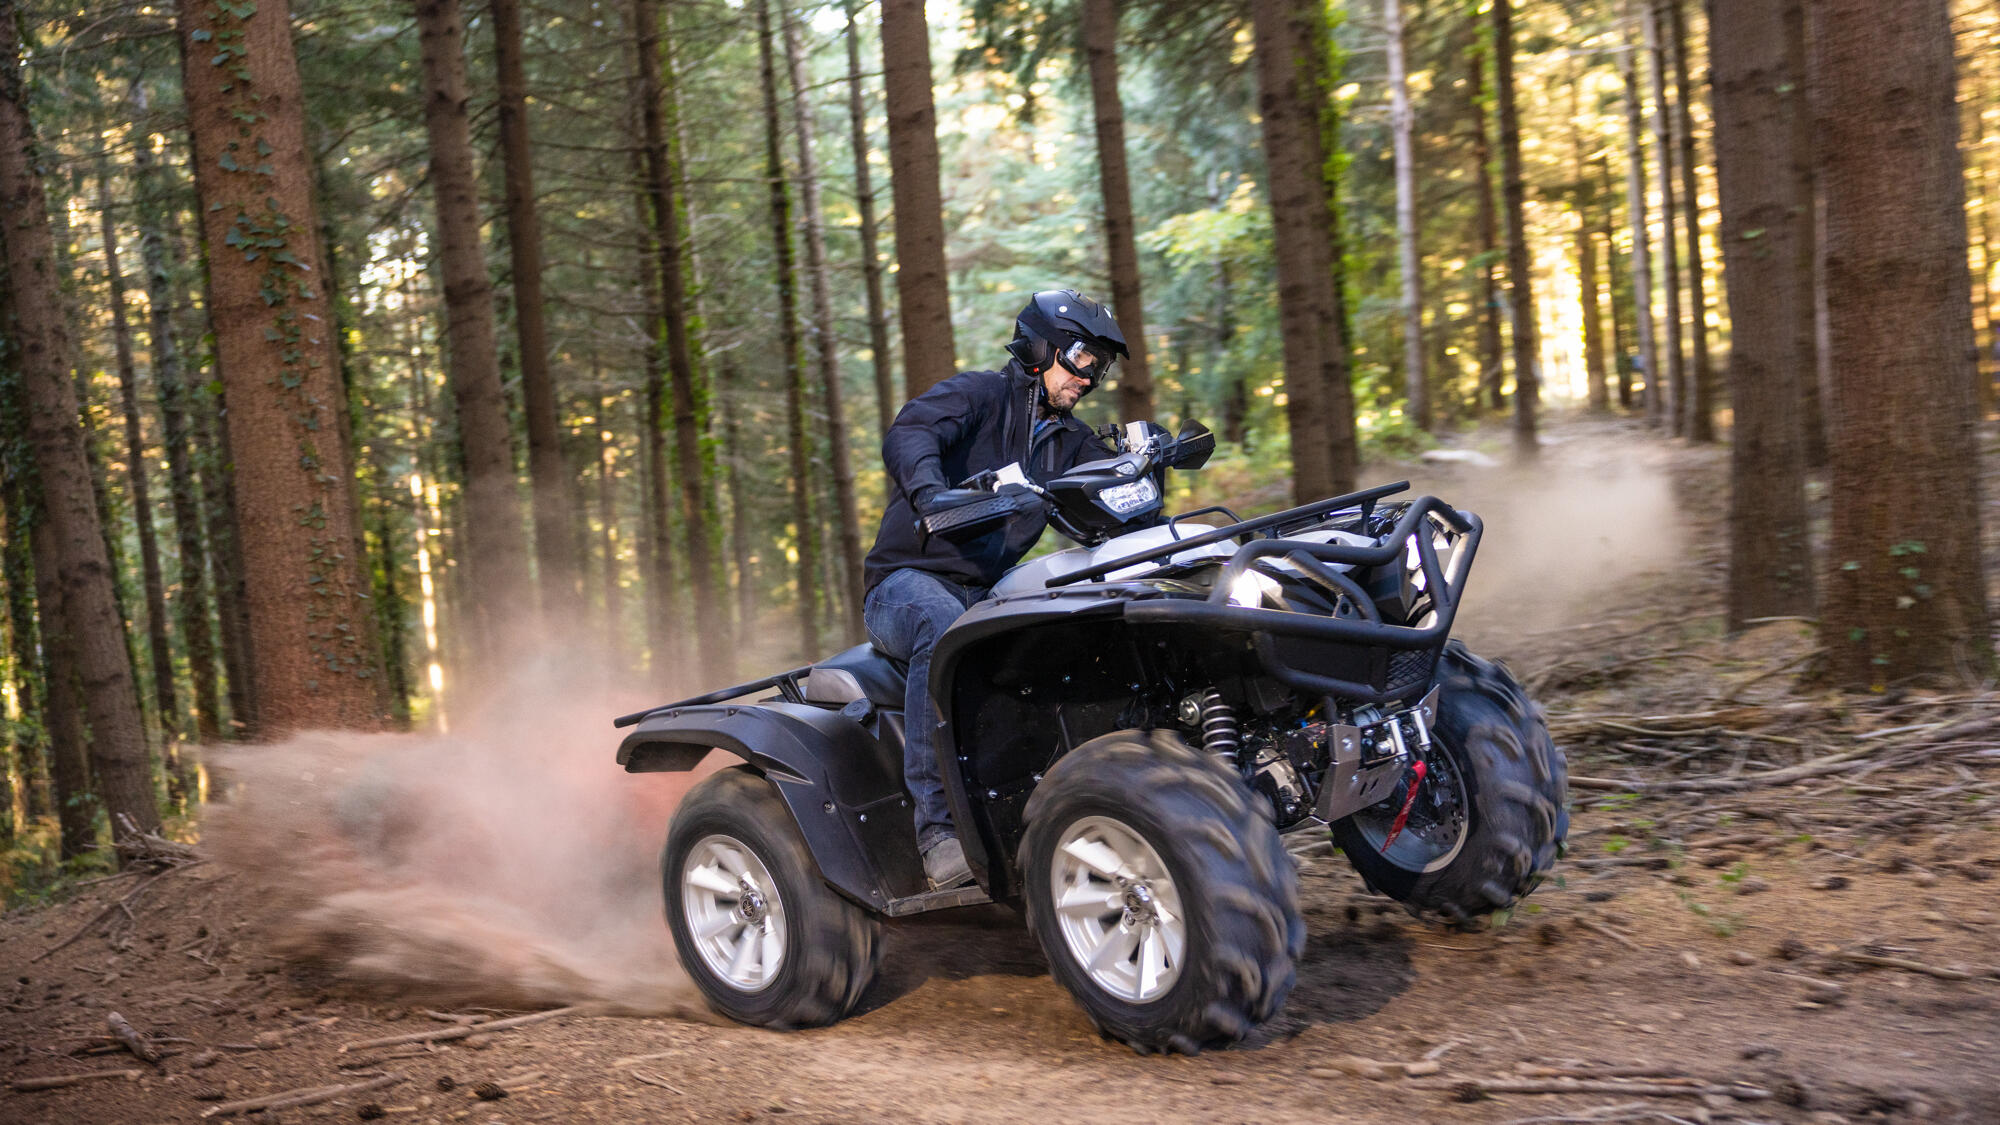 Grizzly 700 25th Anniversary - ATV's & Side by Side - Yamaha Motor